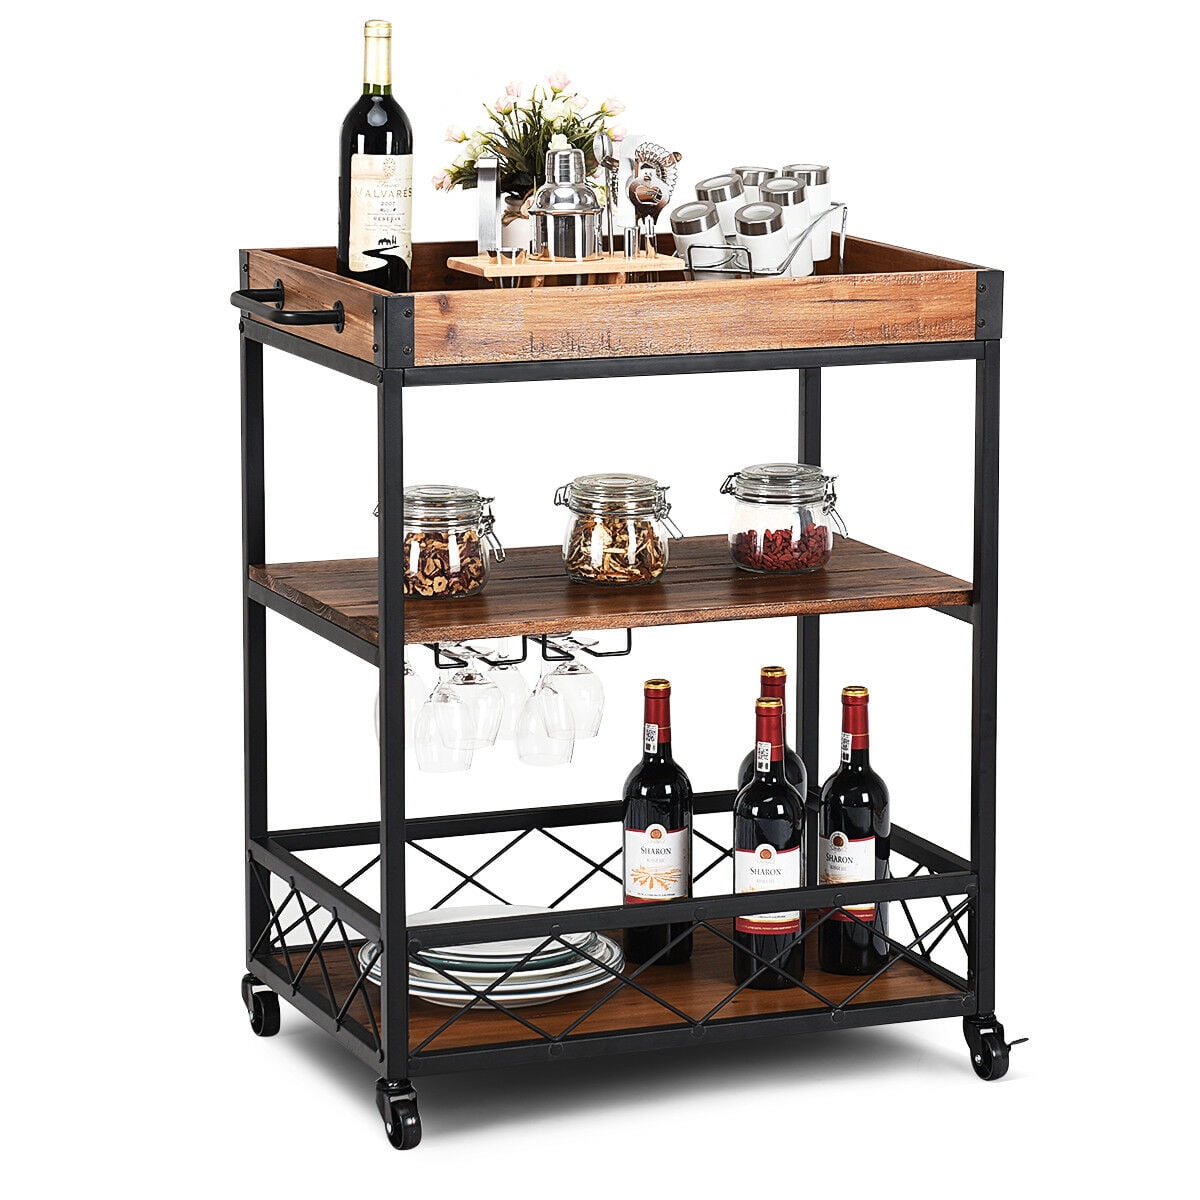 NSdirect Kitchen Cart,Industrial Kitchen Bar/&Serving Cart Rolling Utility Storage Cart with 3-Tier Shelves,Metal Wine Rack Storage and Glass Bottle Holder,Removable Wood Top Box Container,Brown